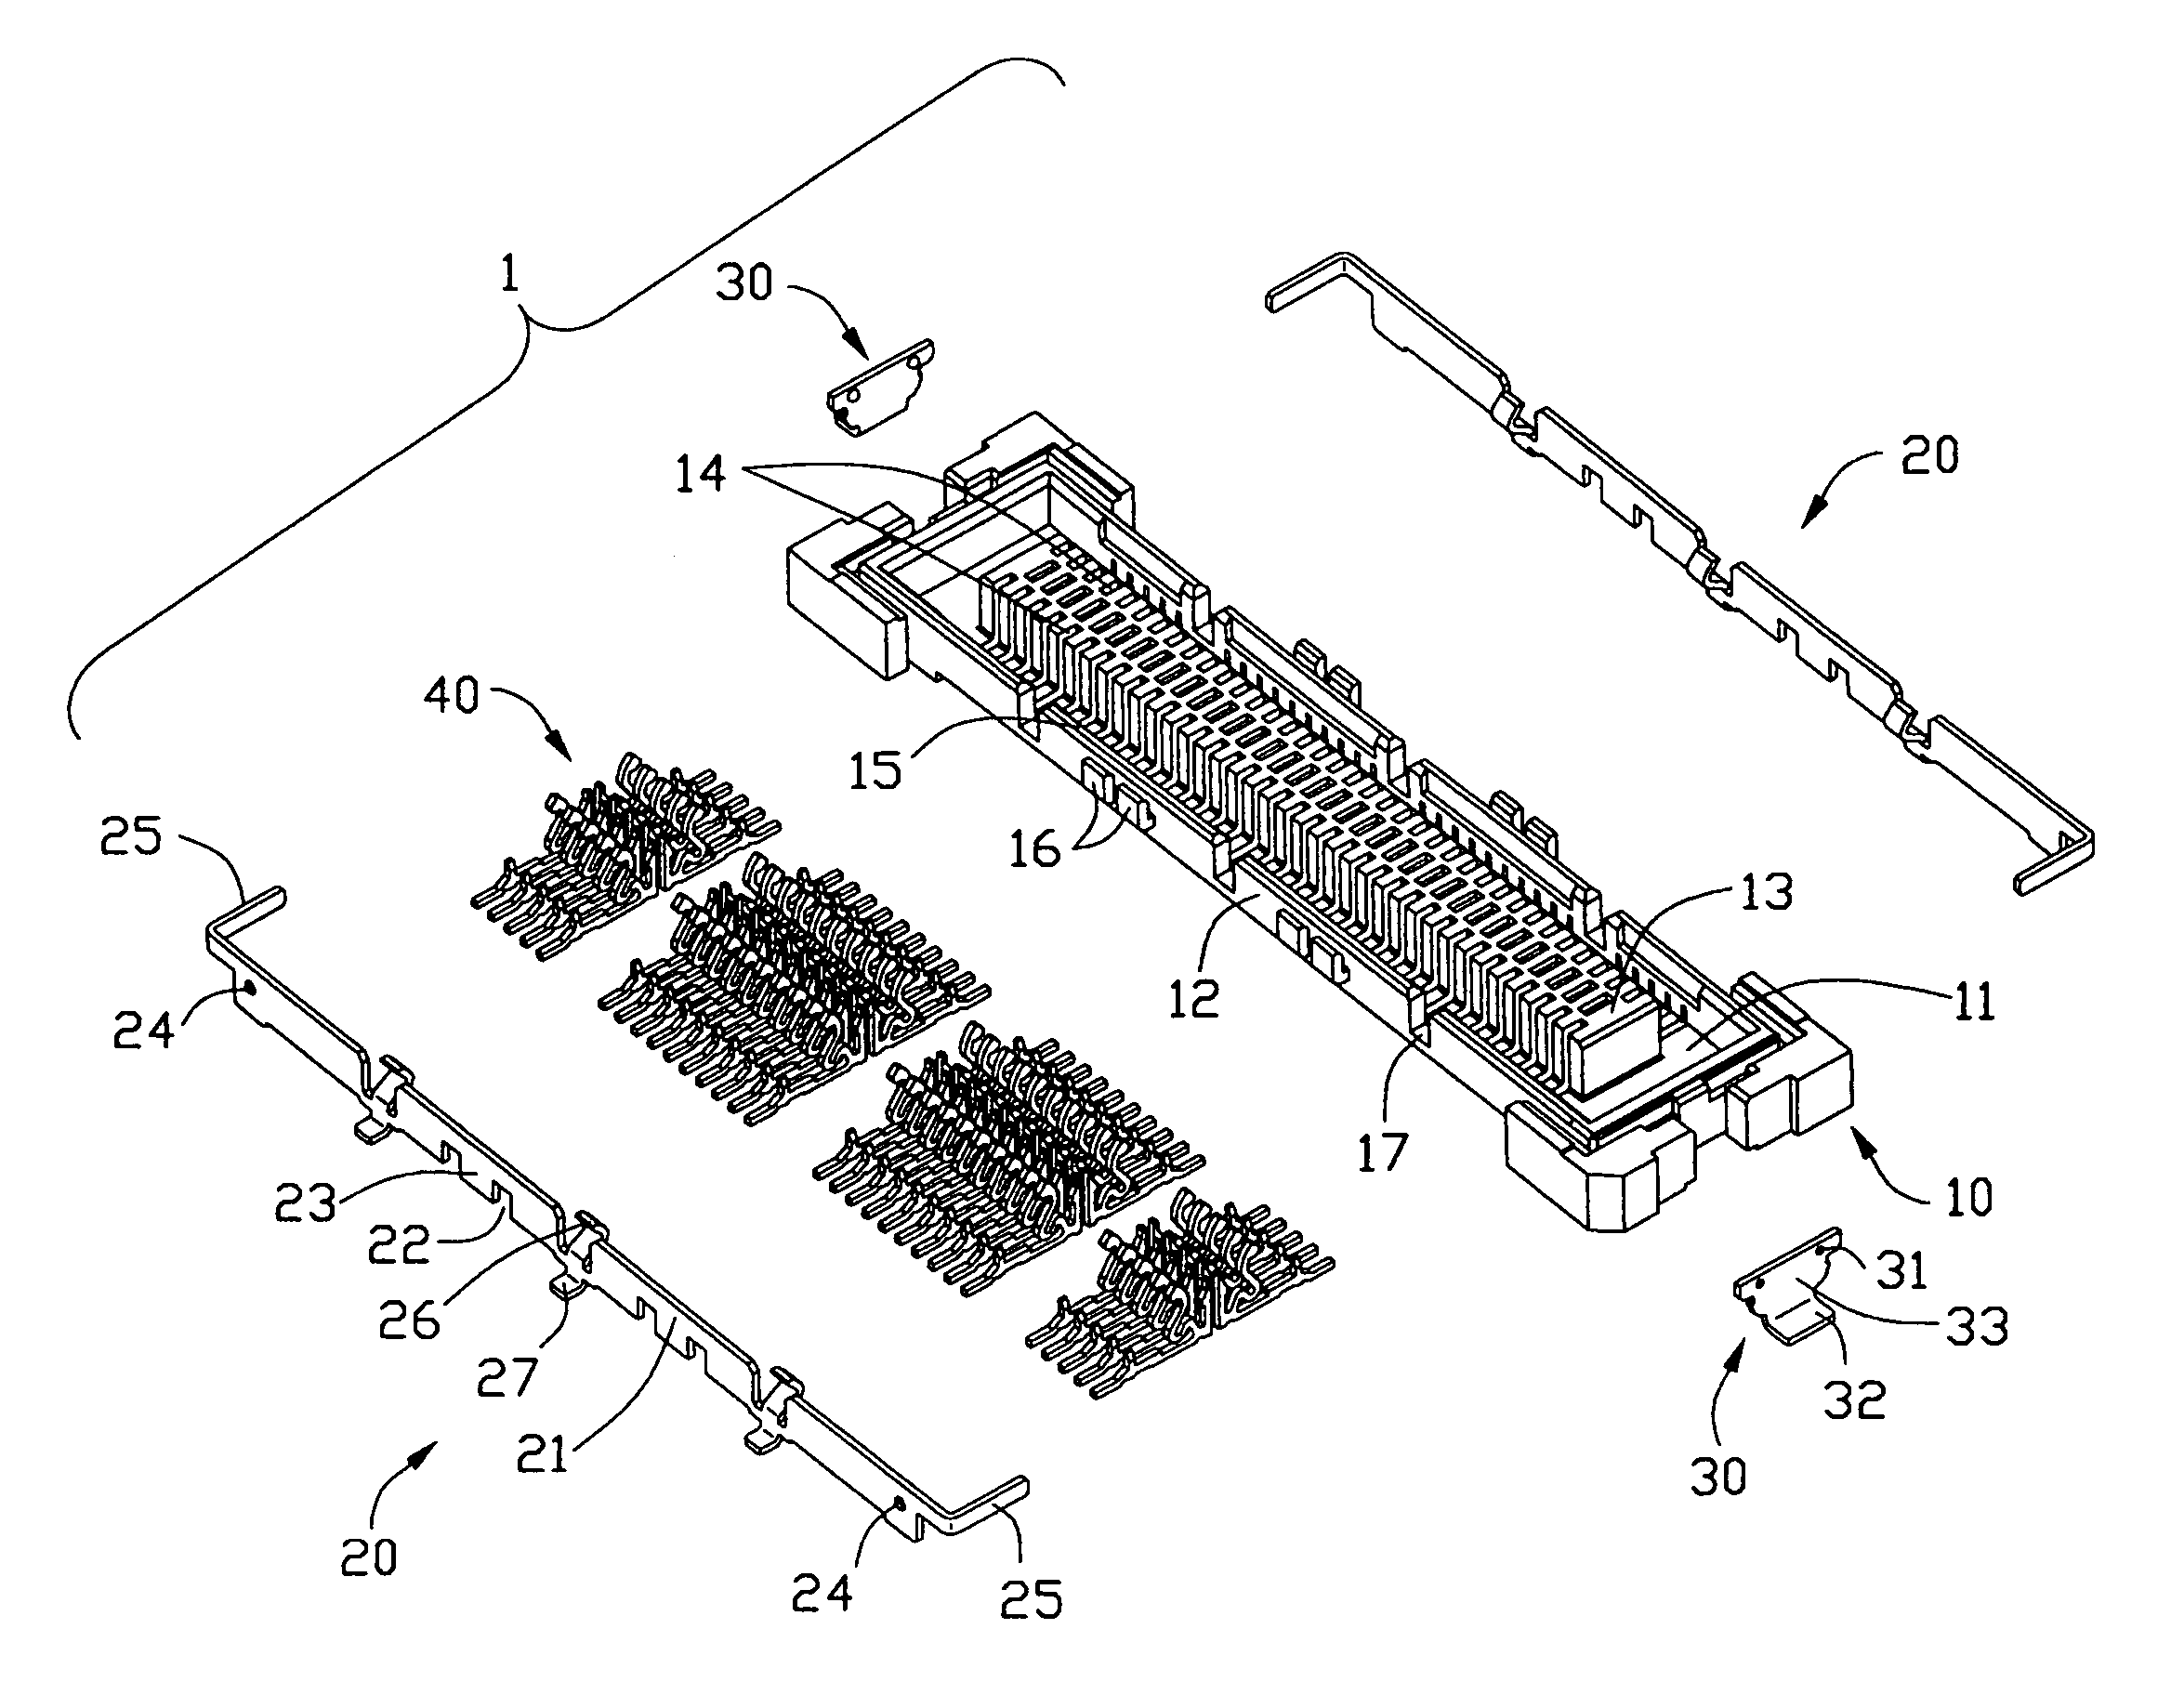 Electrical connector having shielding plates